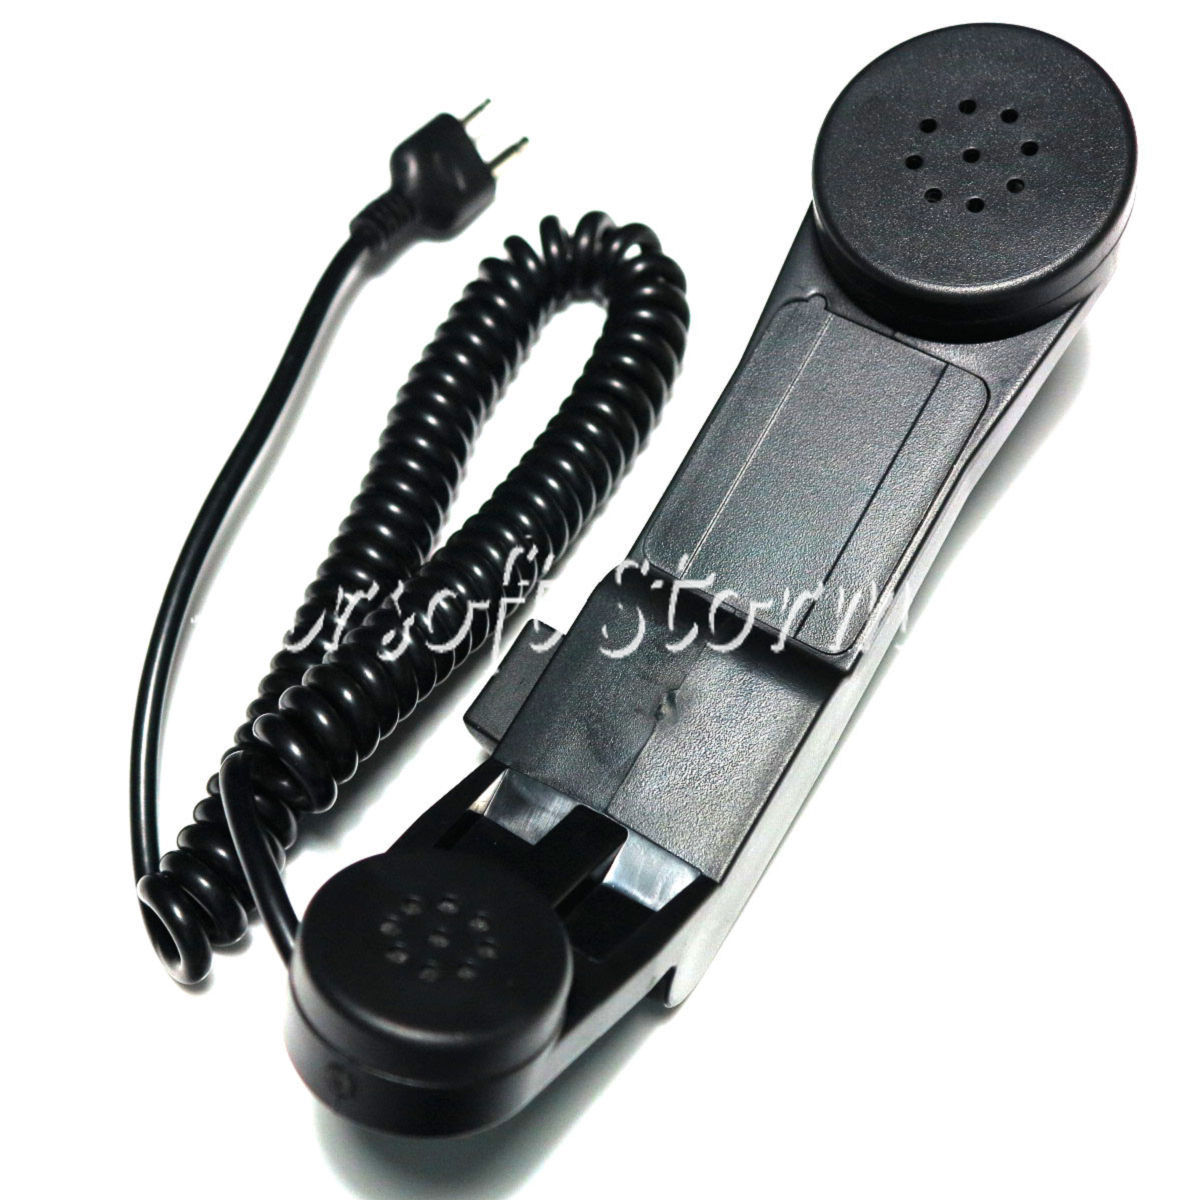 Airsoft Gear SWAT Element H-250 Military Phone for ICOM 2 Pin Radio